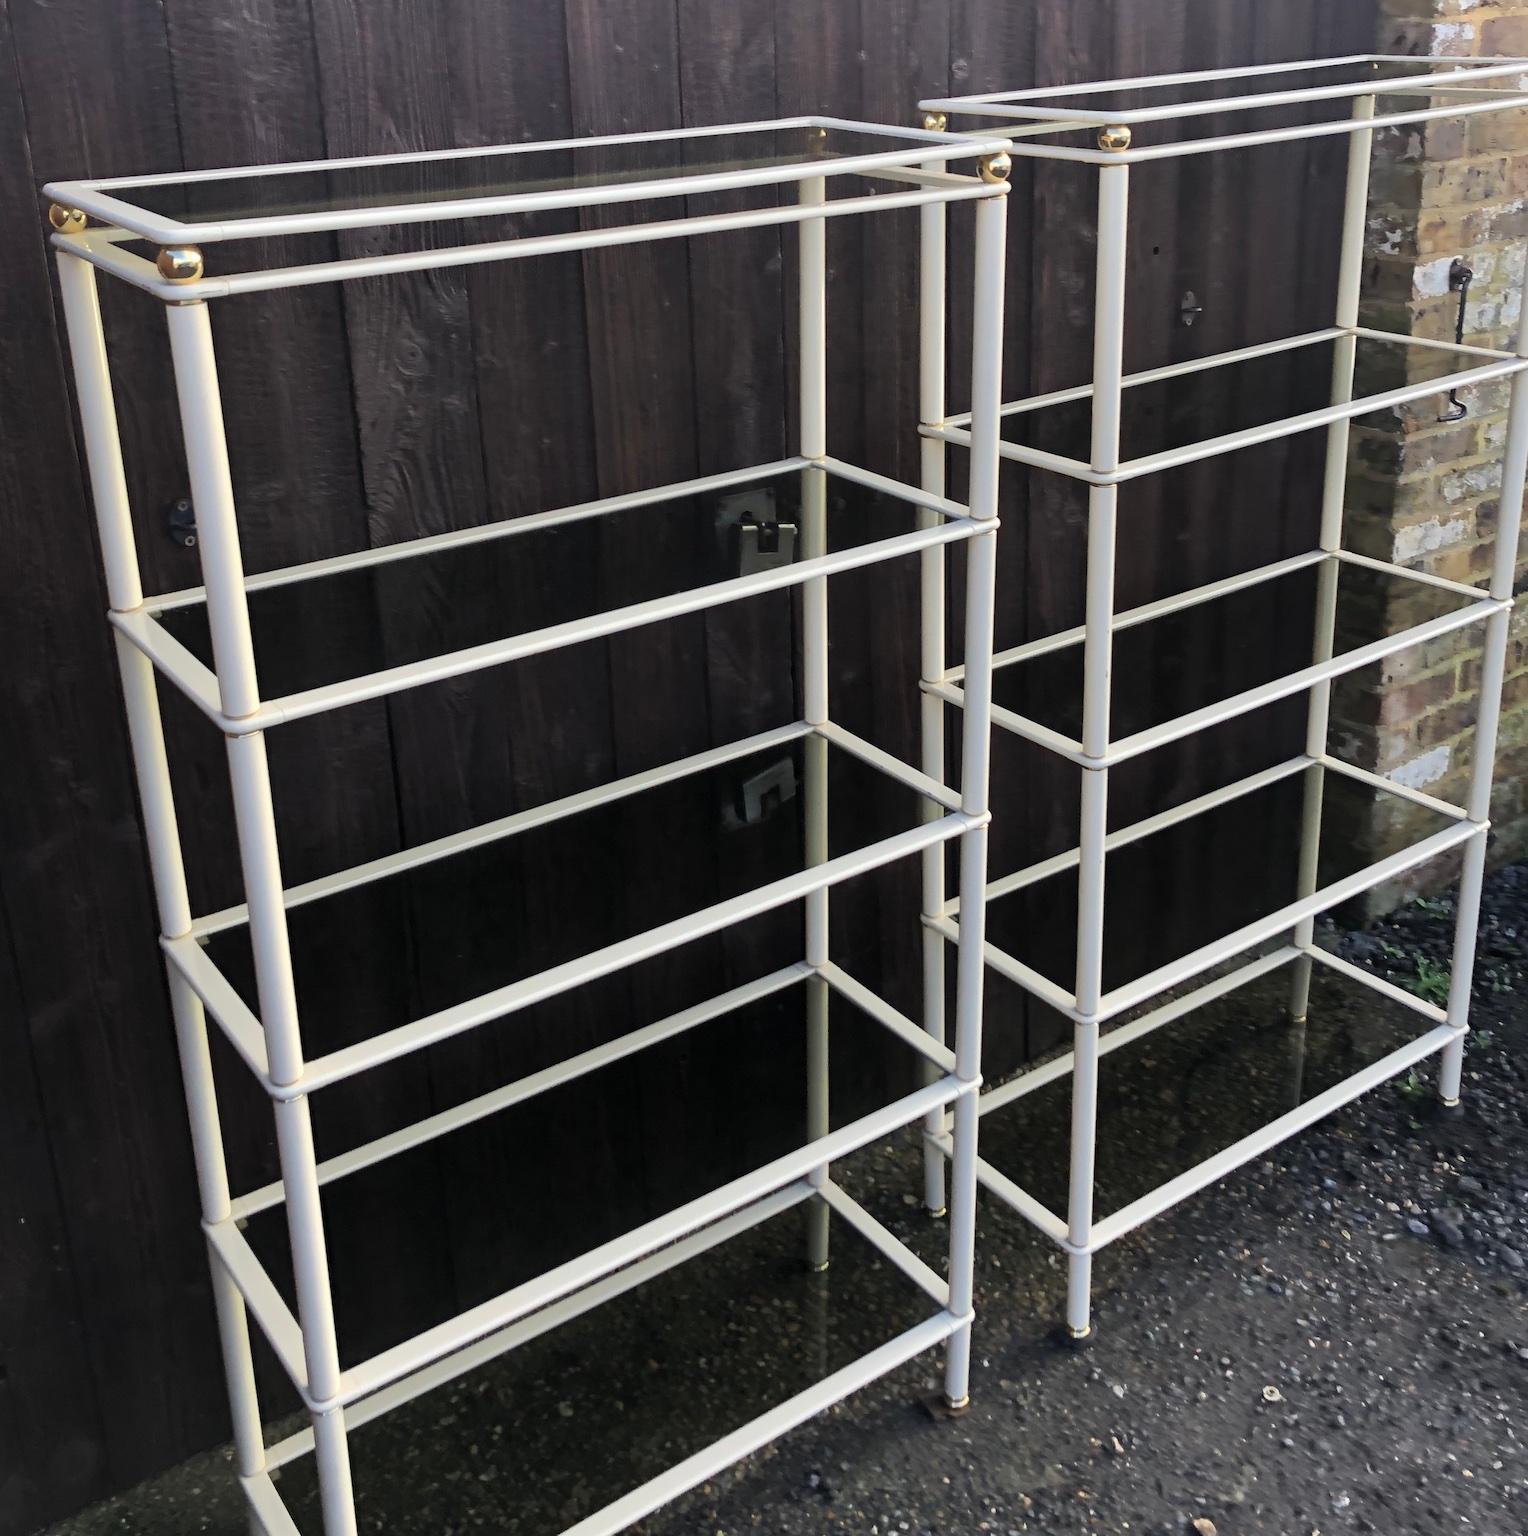 Midcentury Cream and Gold Metal Shelving Units, Italian, 1980s For Sale 5